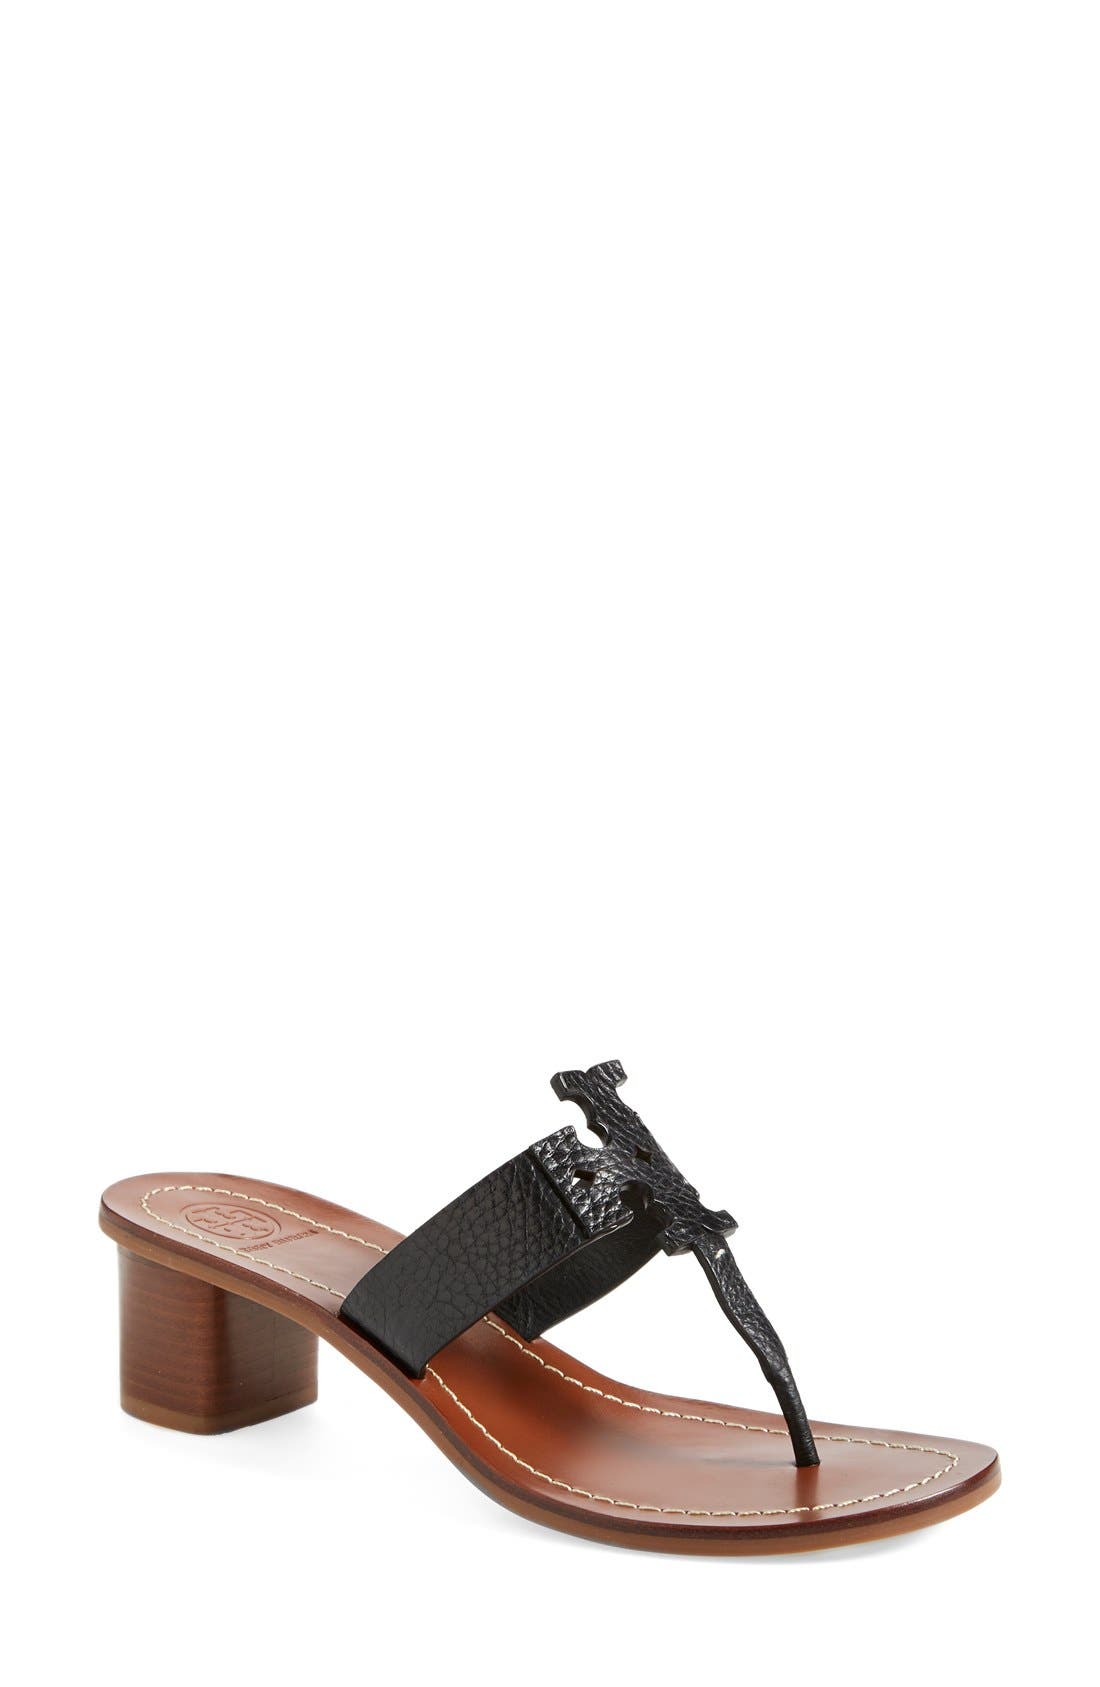 Tory Burch 'Moore' Leather Thong Sandal 